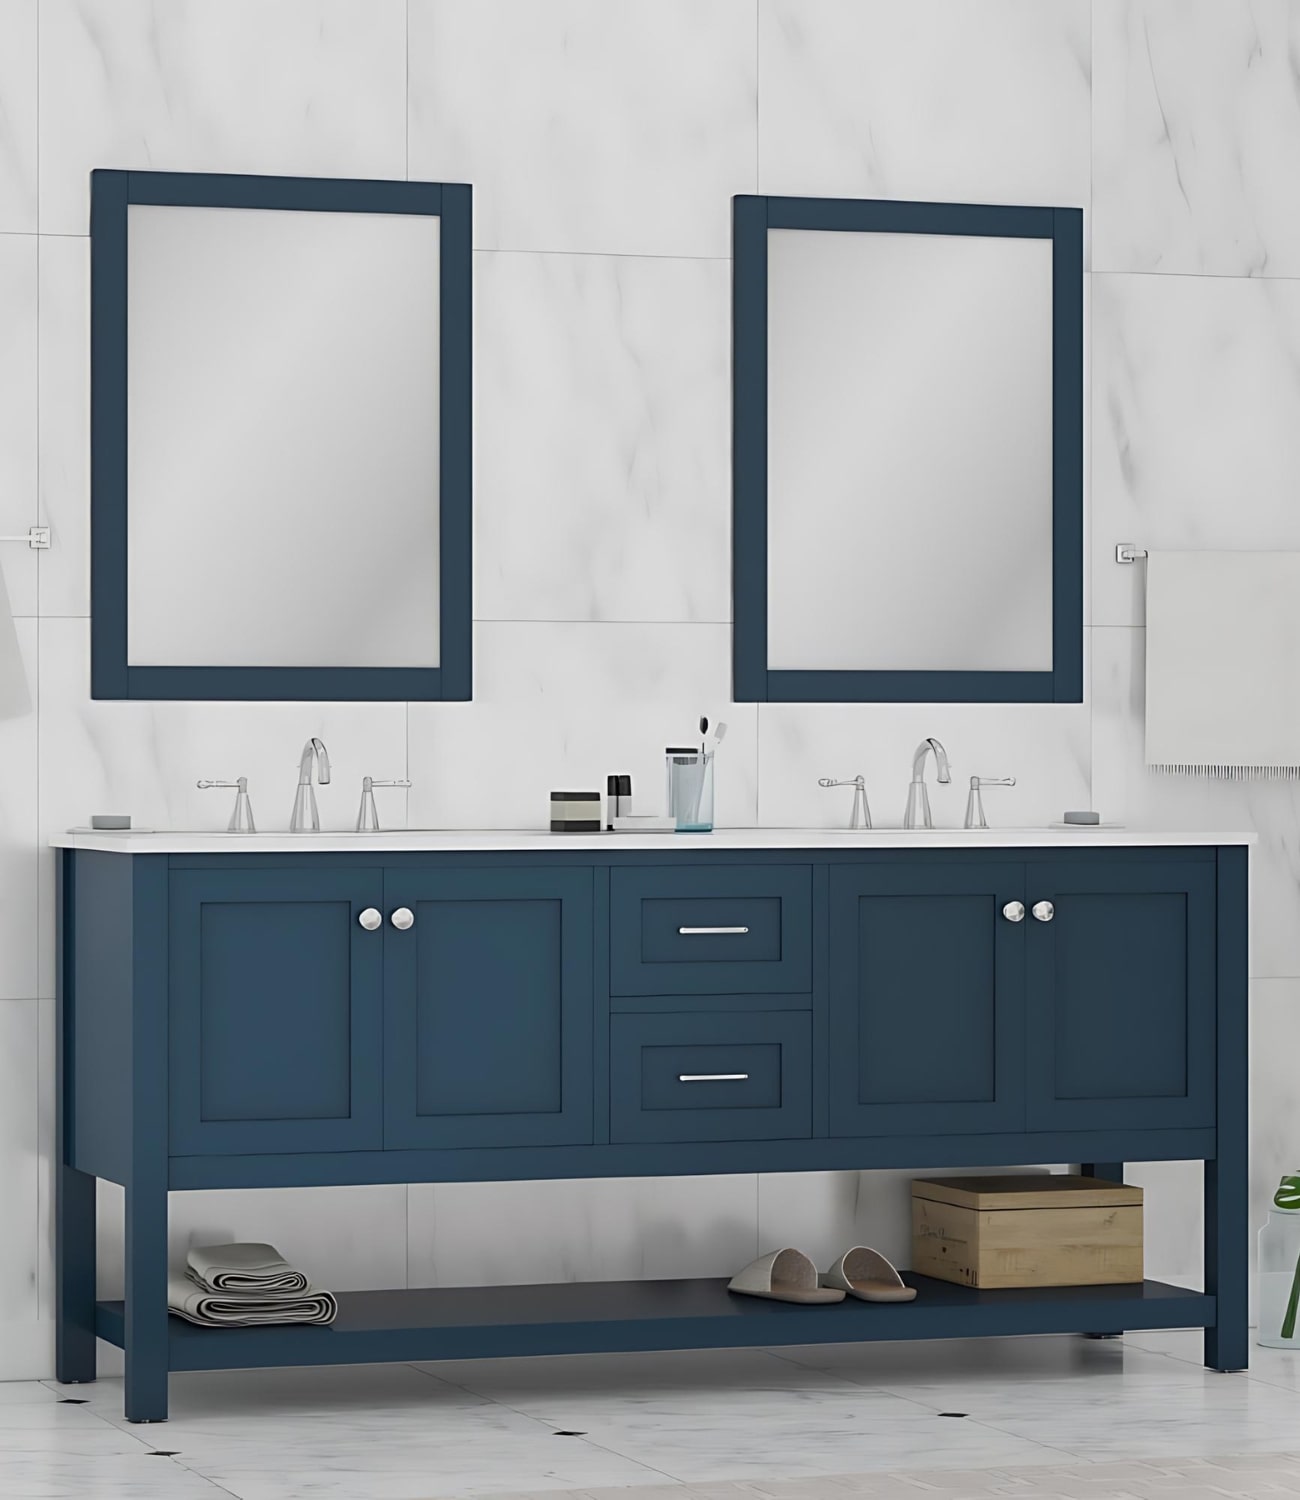 Contemporary Bathroom vanities waiting to find their next home!